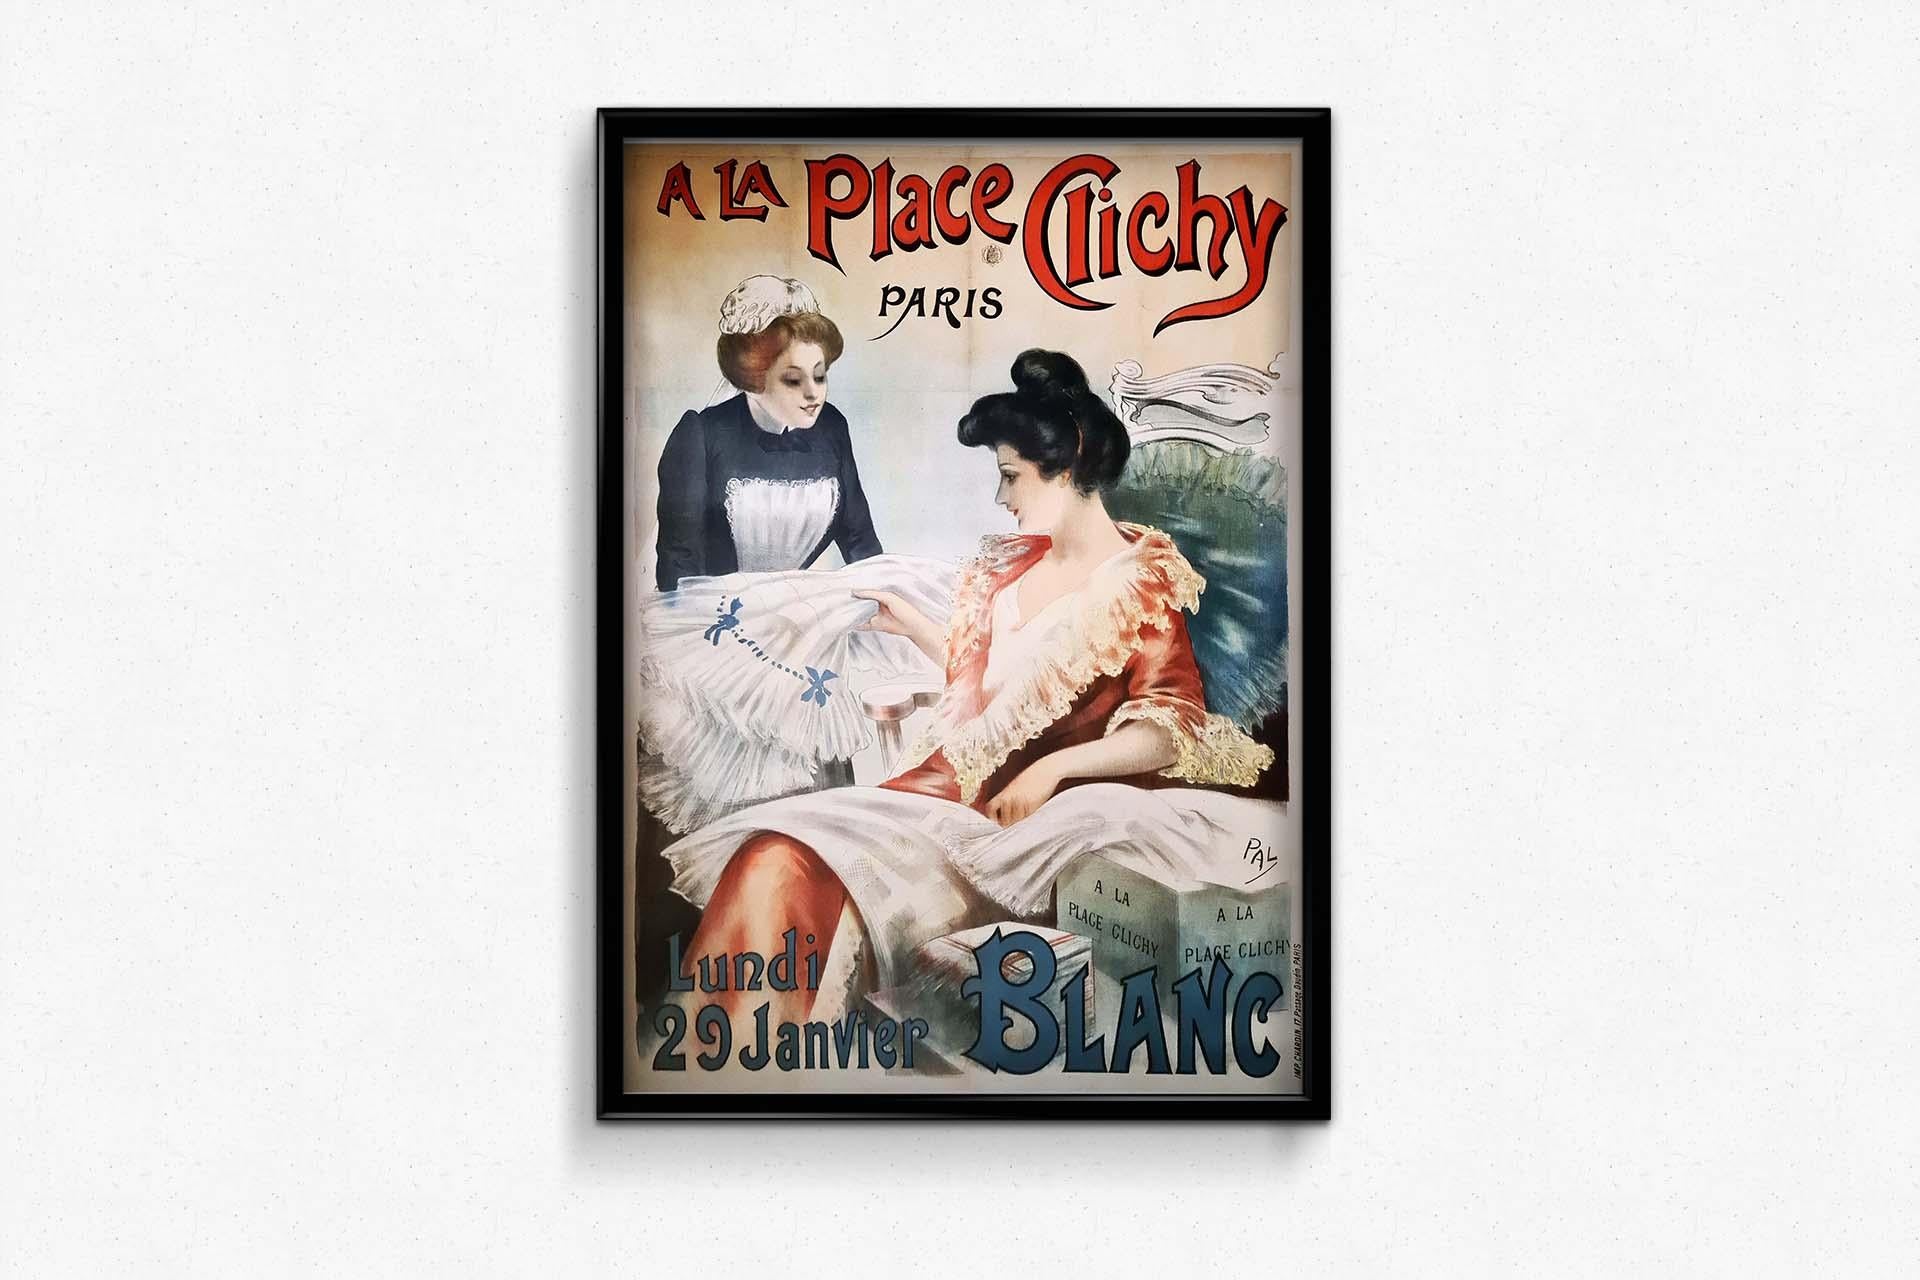 Beautiful original early 20th century poster by PAL - A la Place Clichy Paris For Sale 1